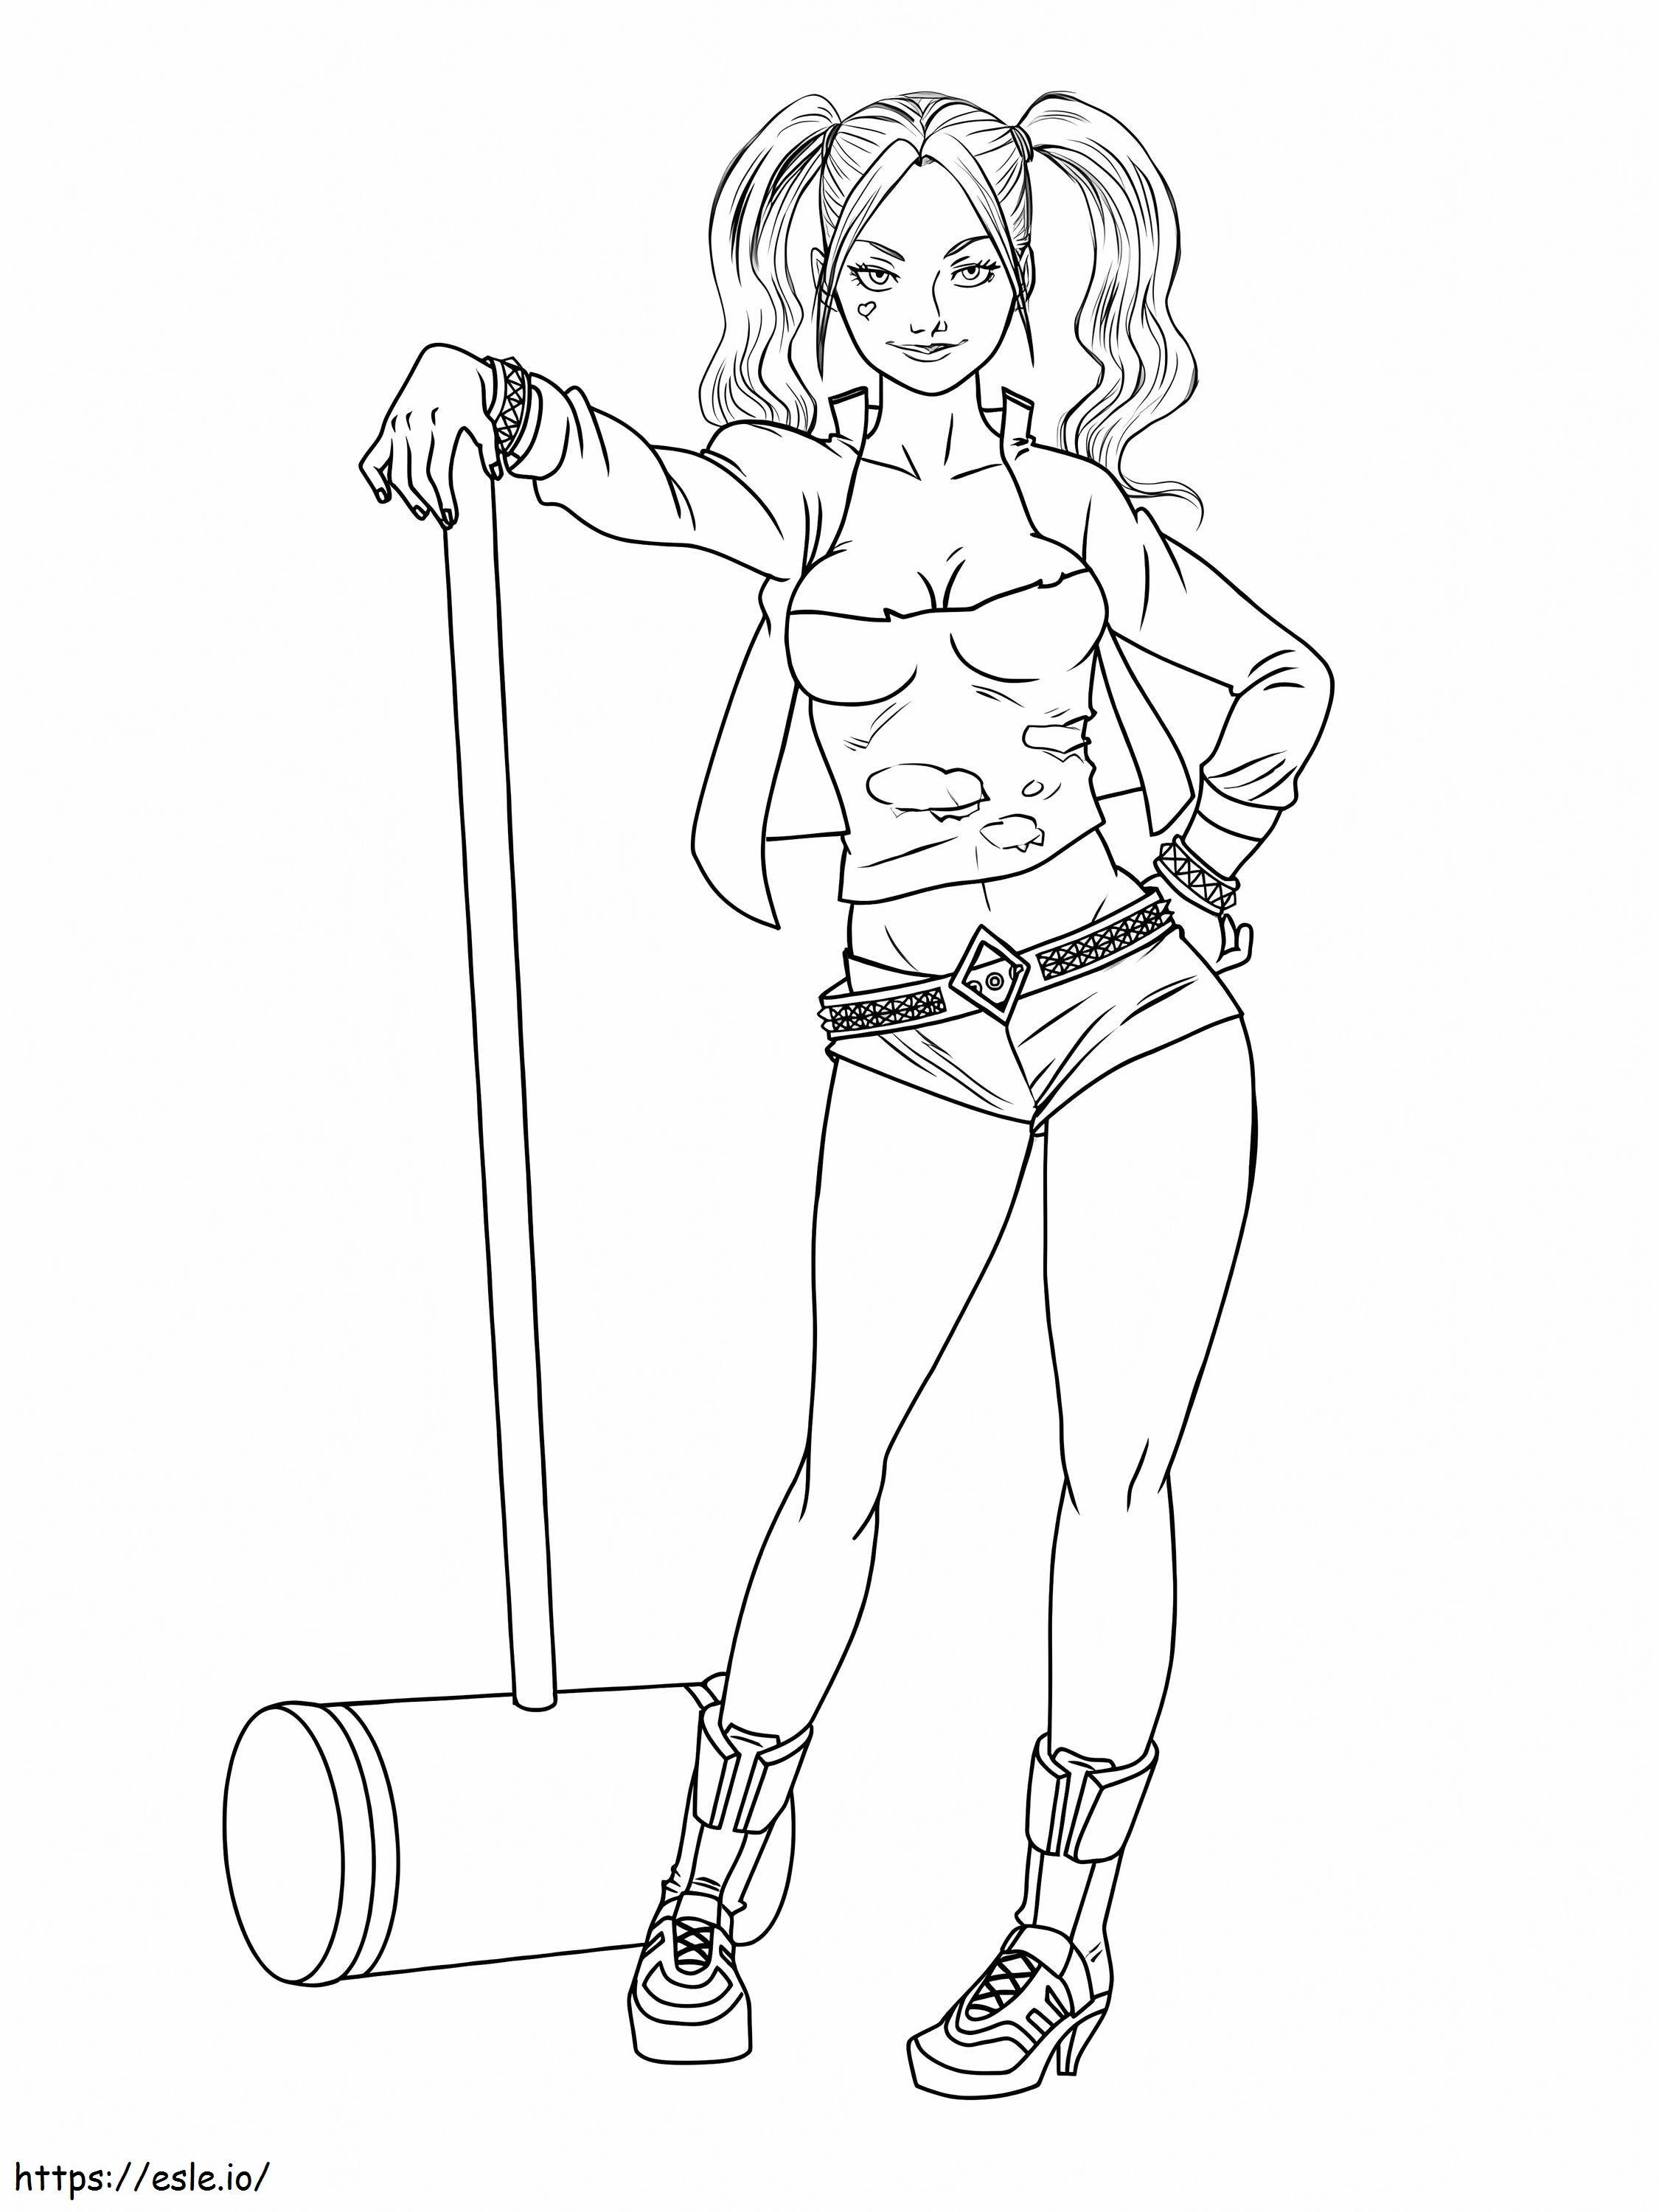 Harley Quinn With Hammer coloring page